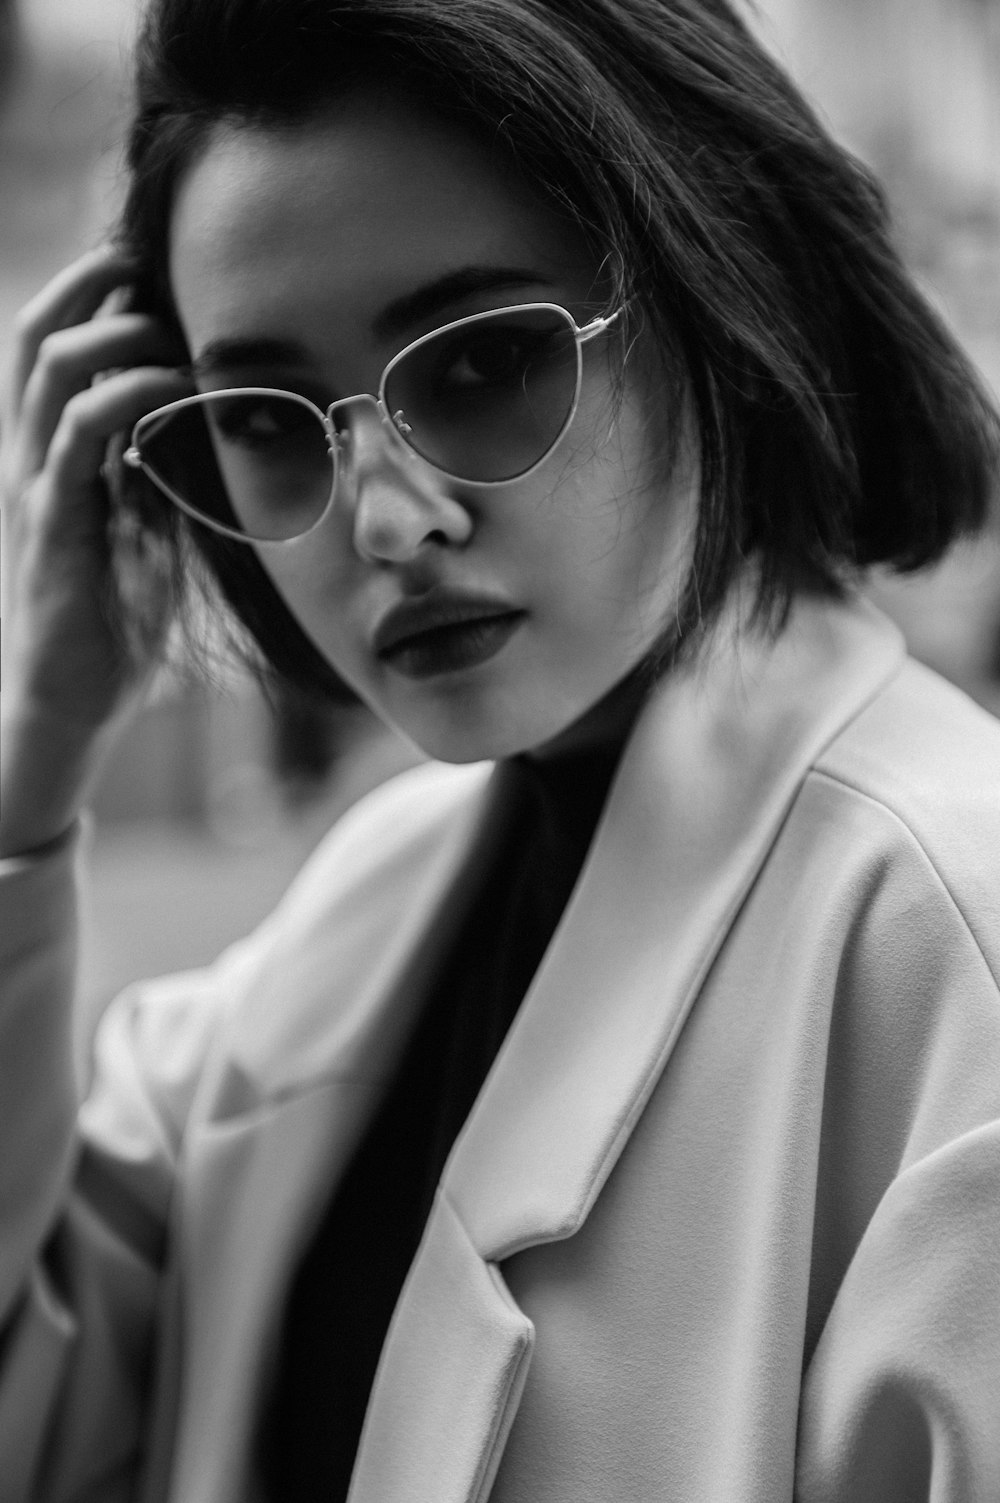 a woman in a white coat and sunglasses